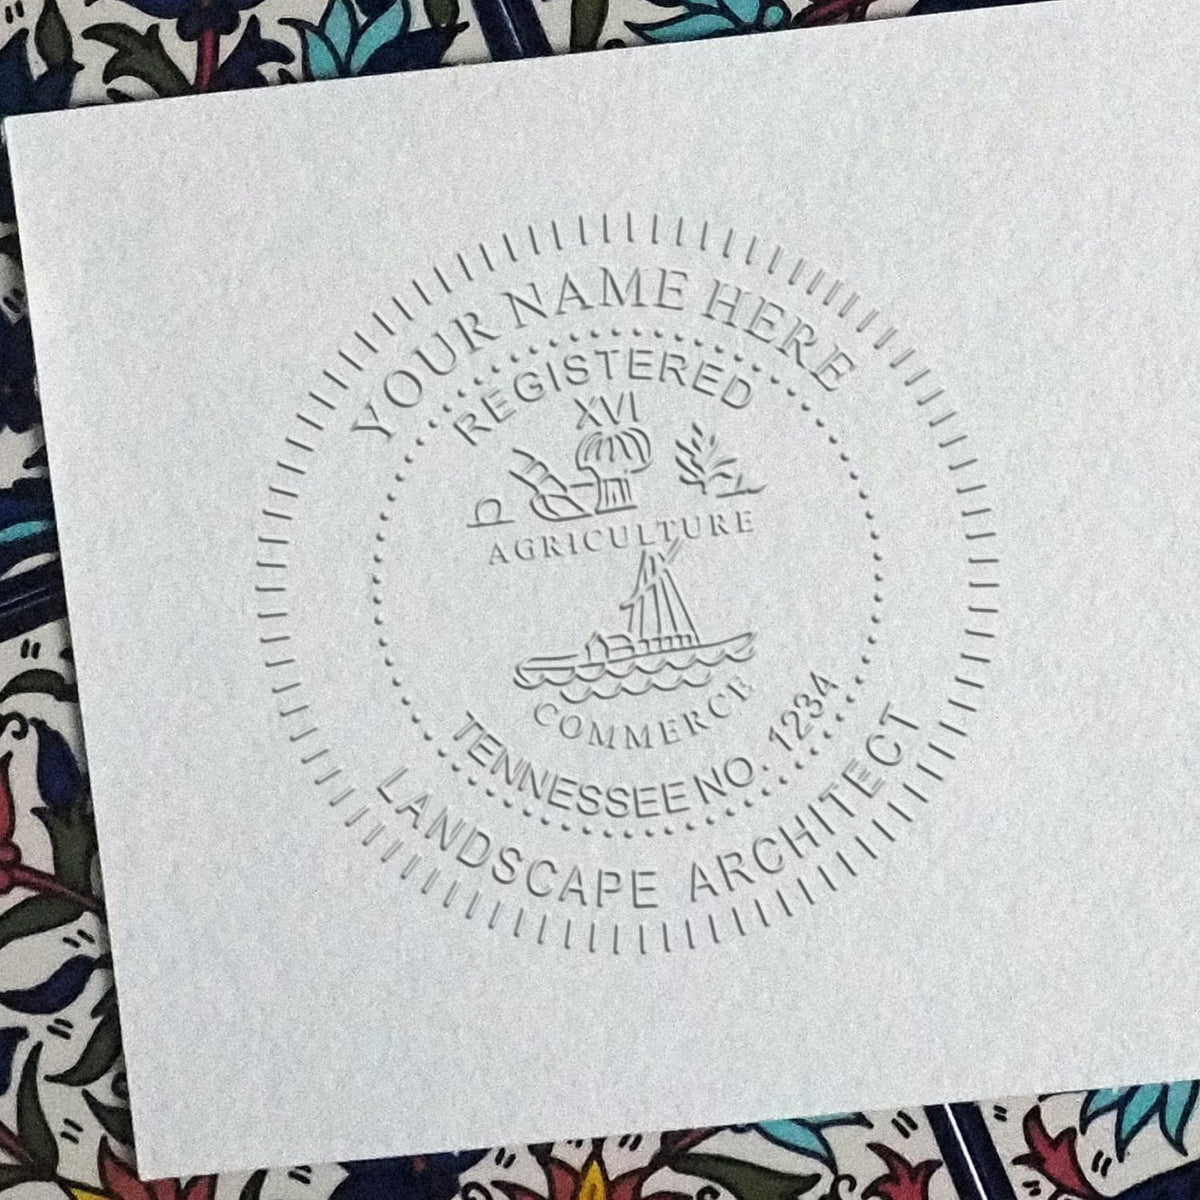 An in use photo of the Hybrid Tennessee Landscape Architect Seal showing a sample imprint on a cardstock